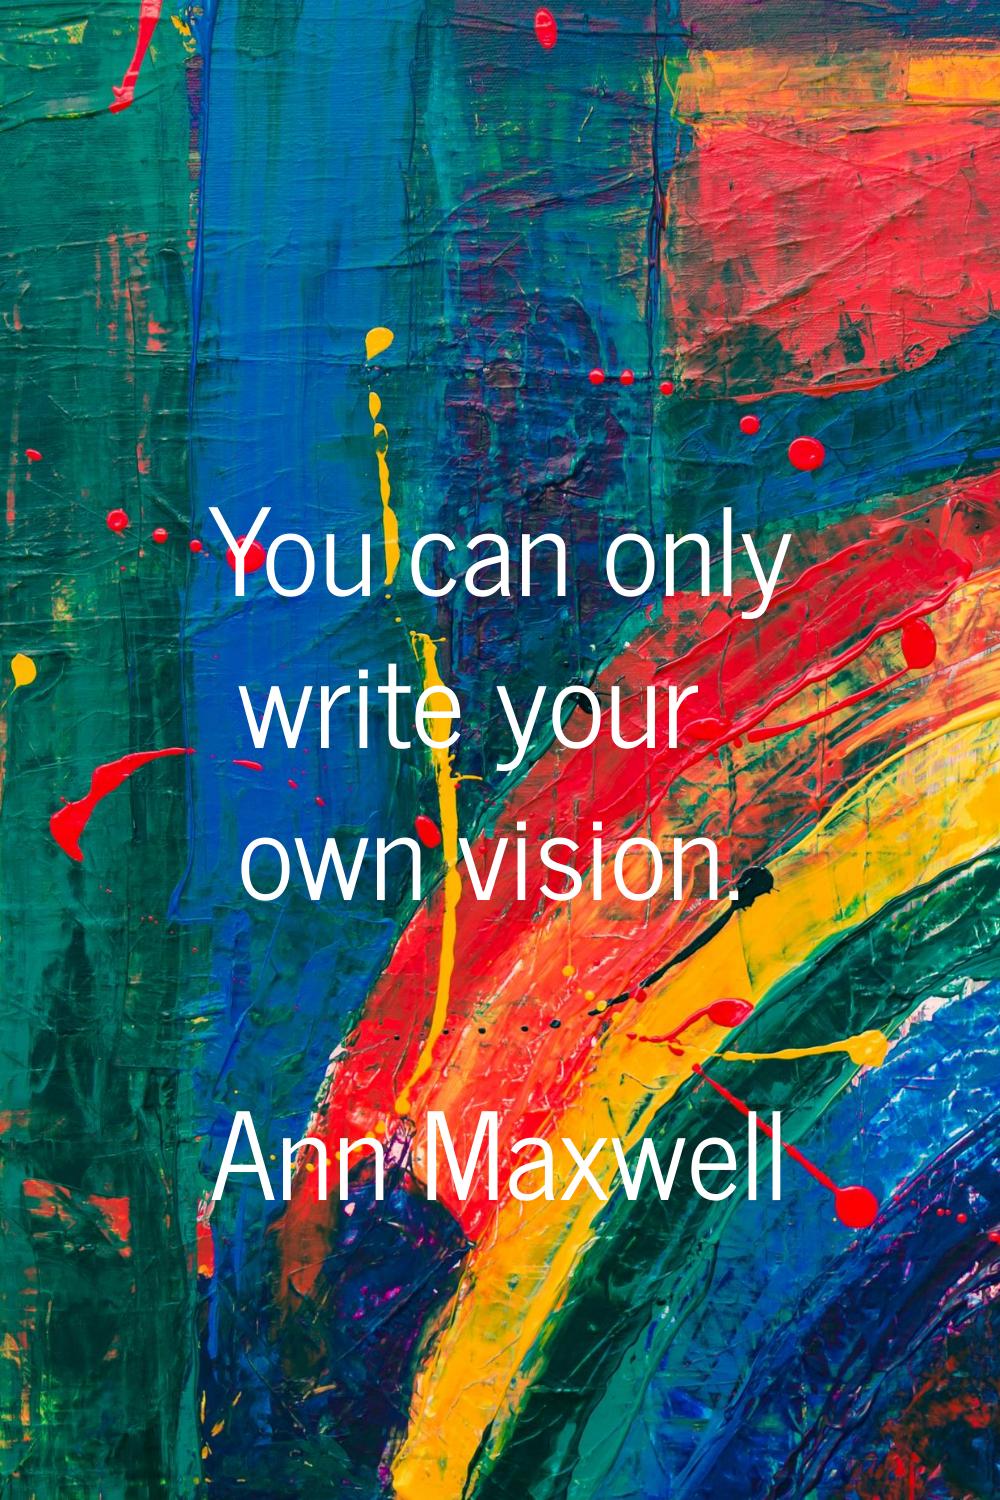 You can only write your own vision.